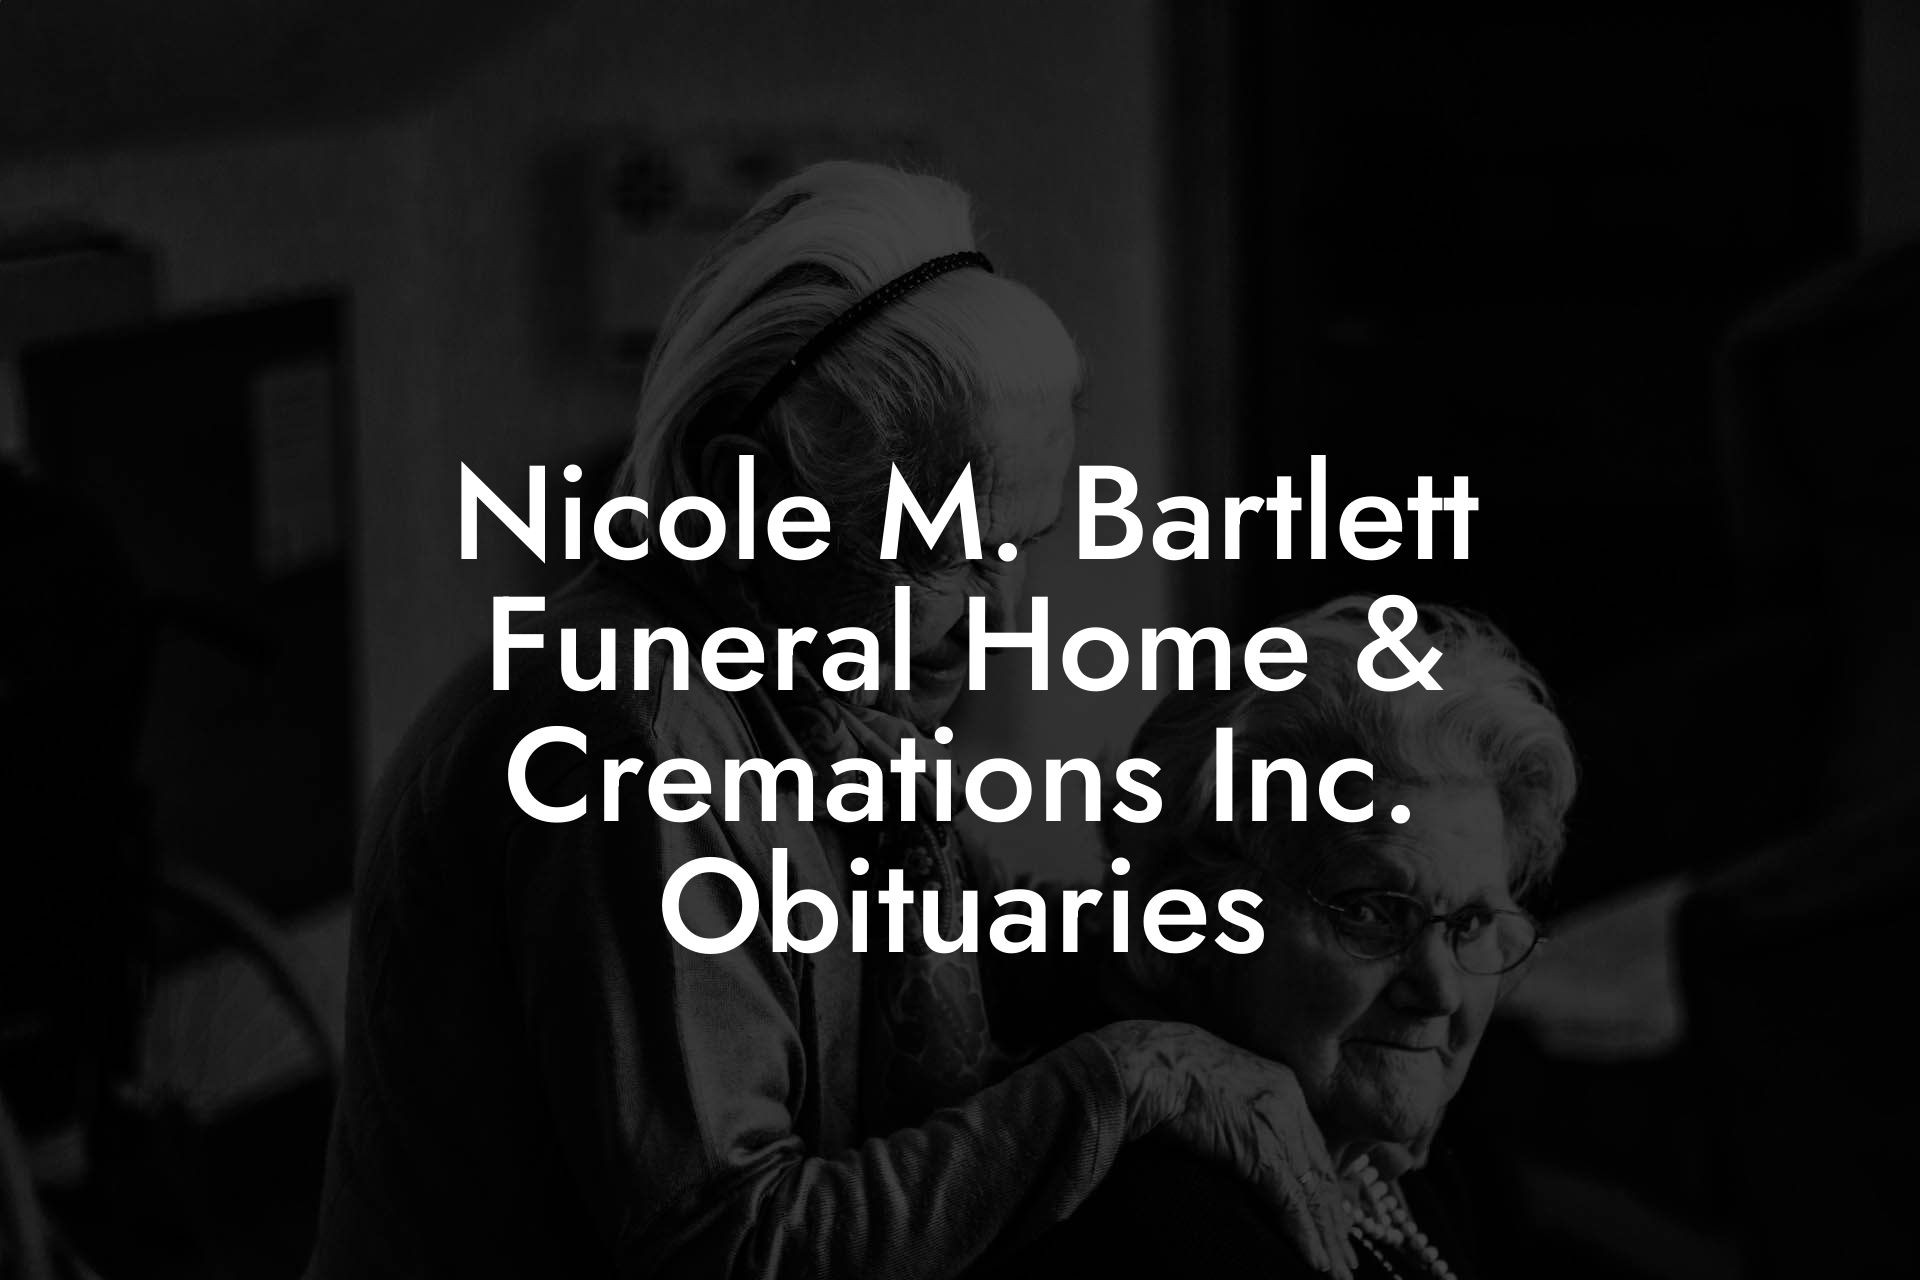 Nicole M. Bartlett Funeral Home & Cremations Inc. Obituaries